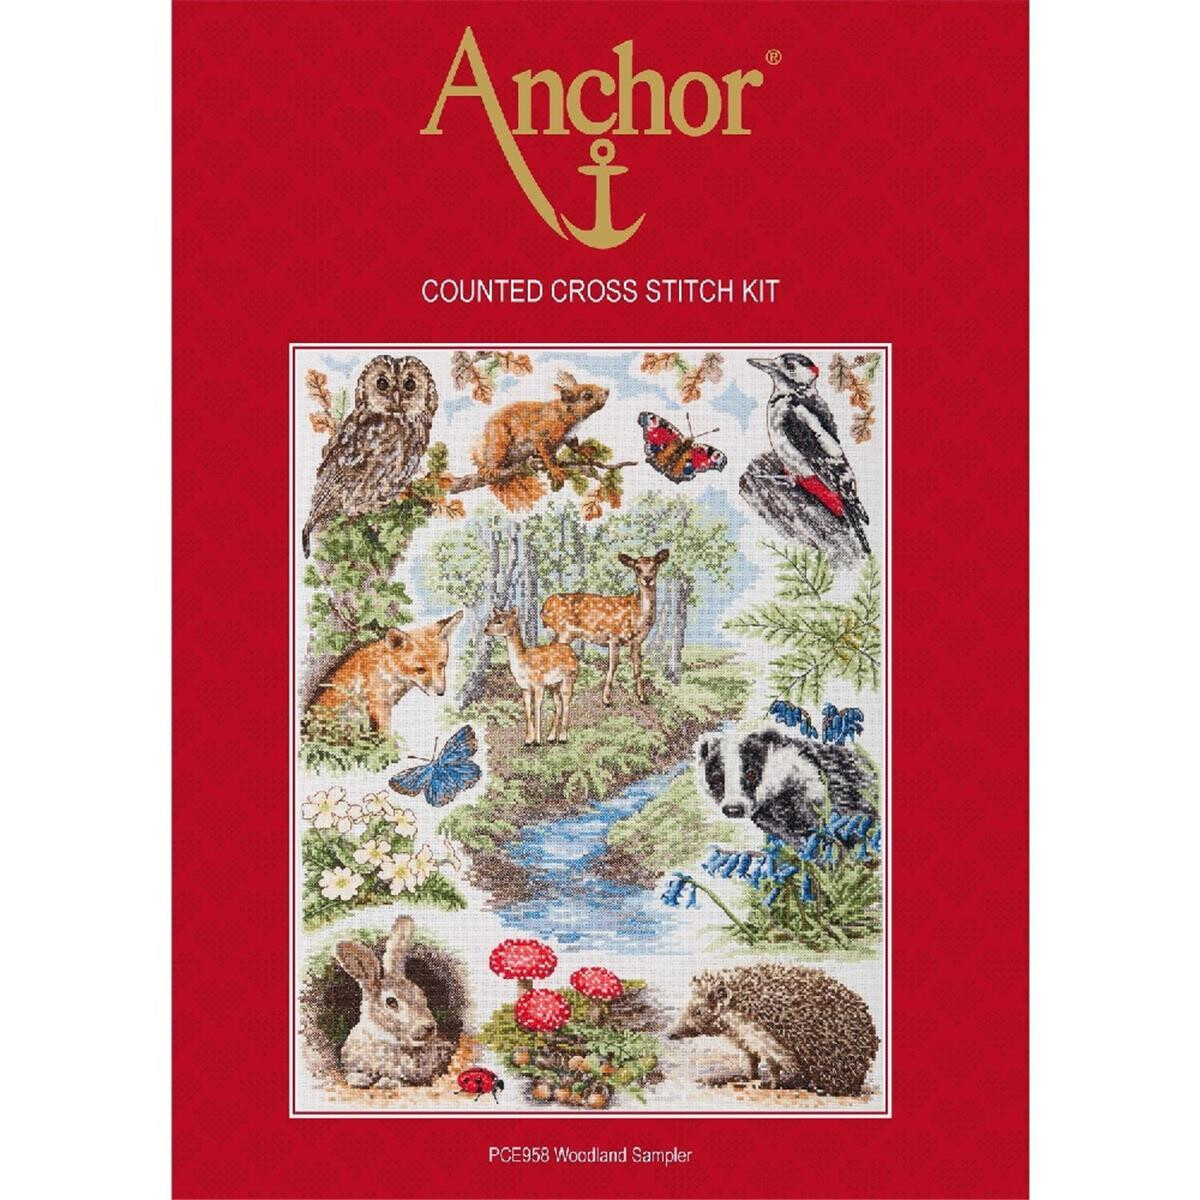 Anchor counted Cross Stitch kit "Woodland...